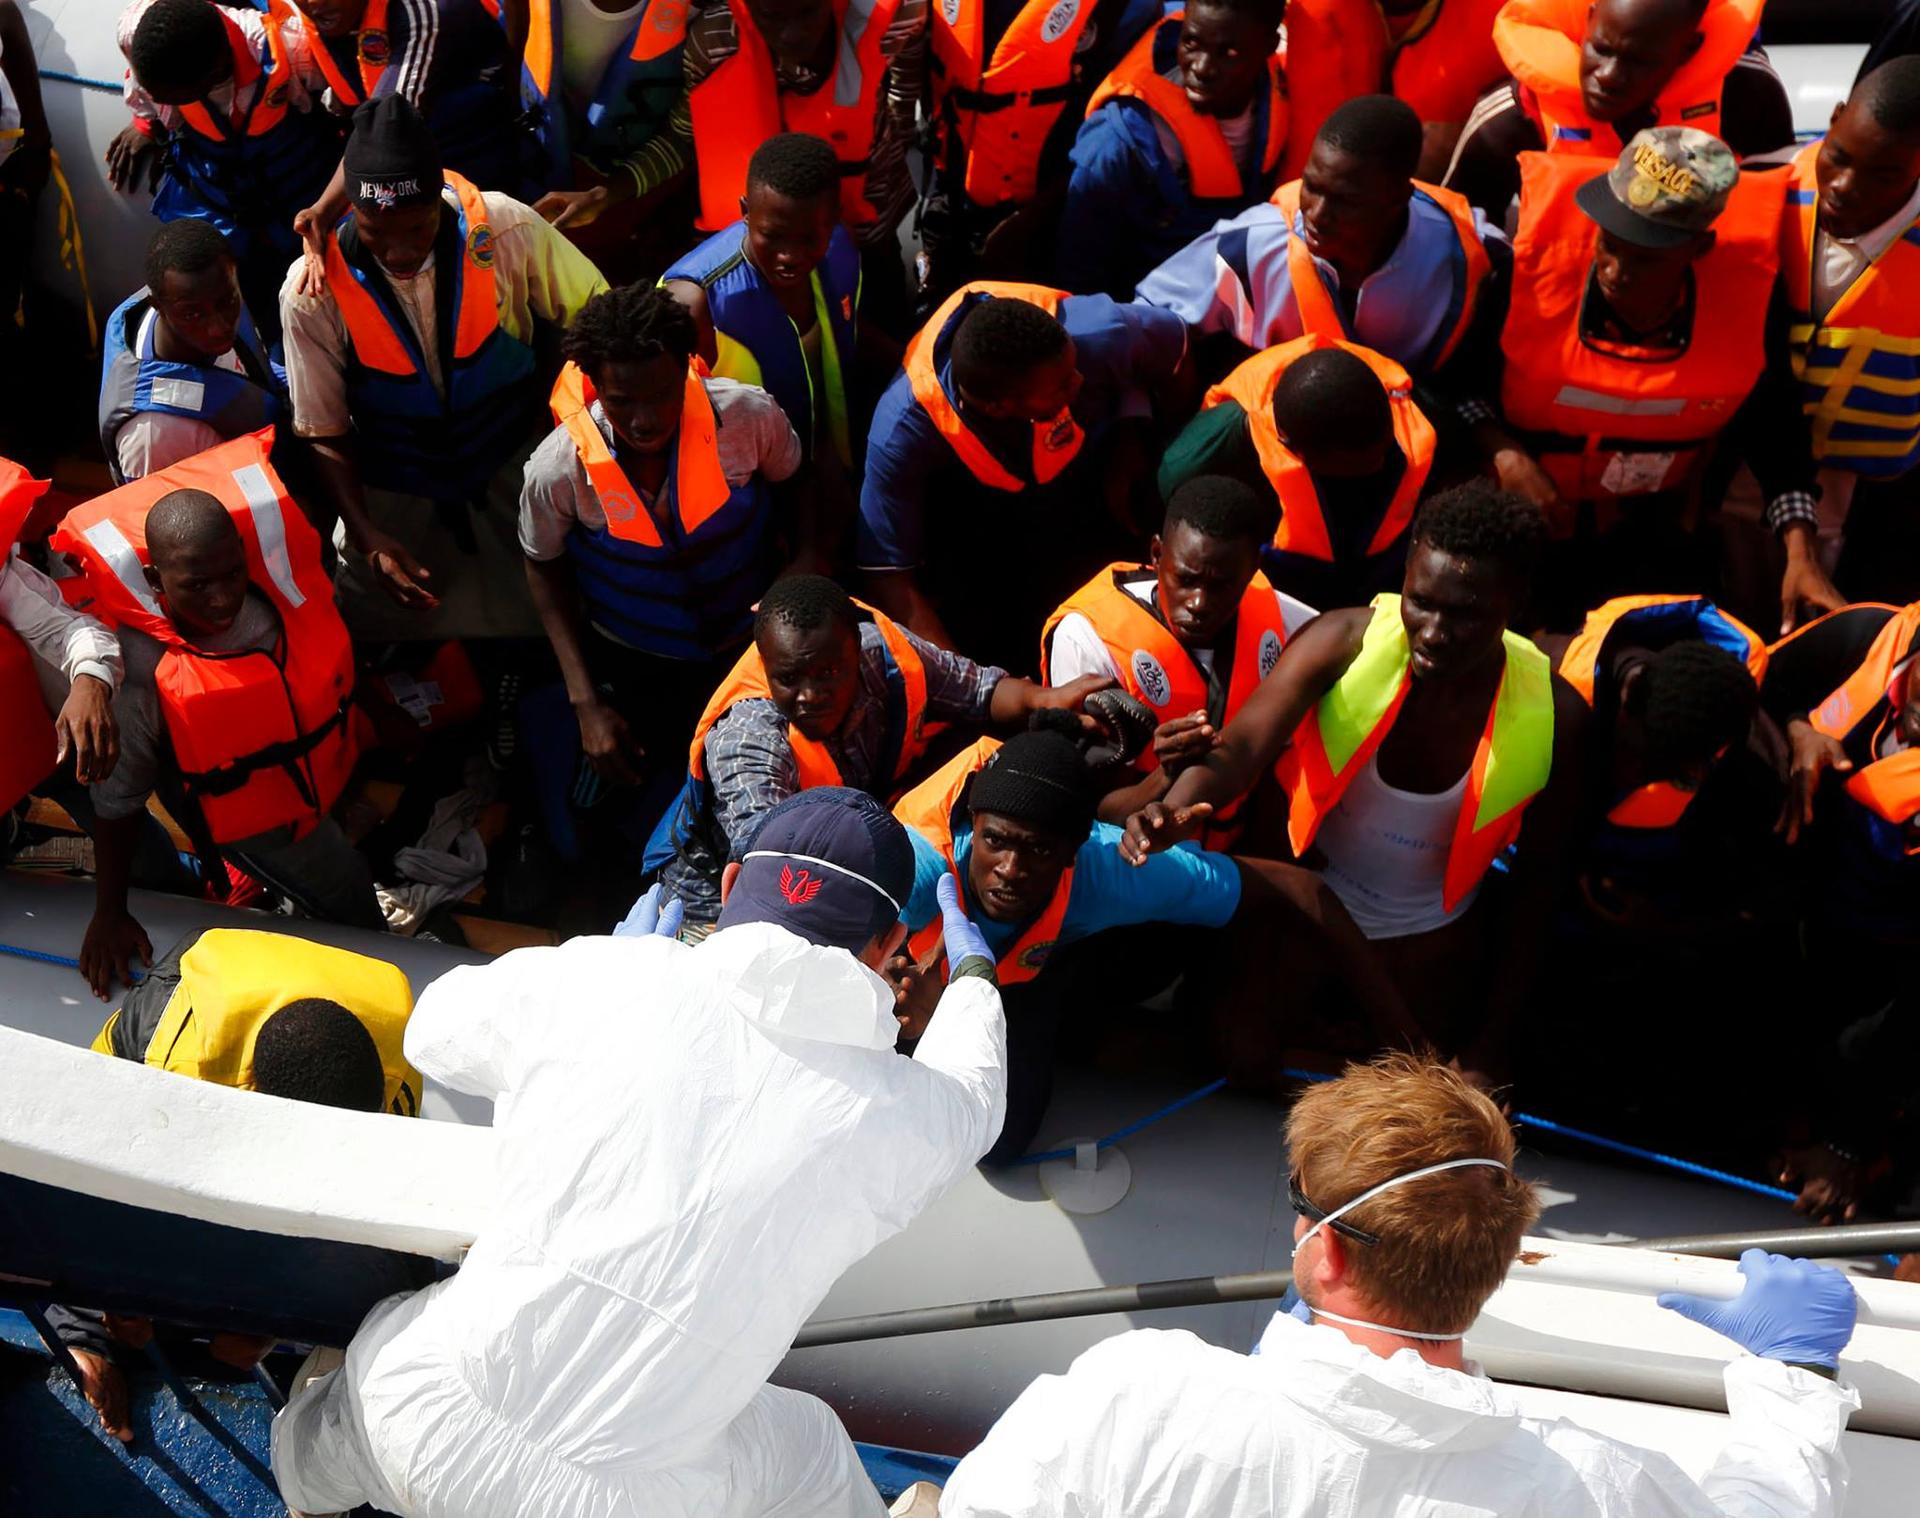 Migrants attempting to cross the Mediteranean being assisted by MOAS.